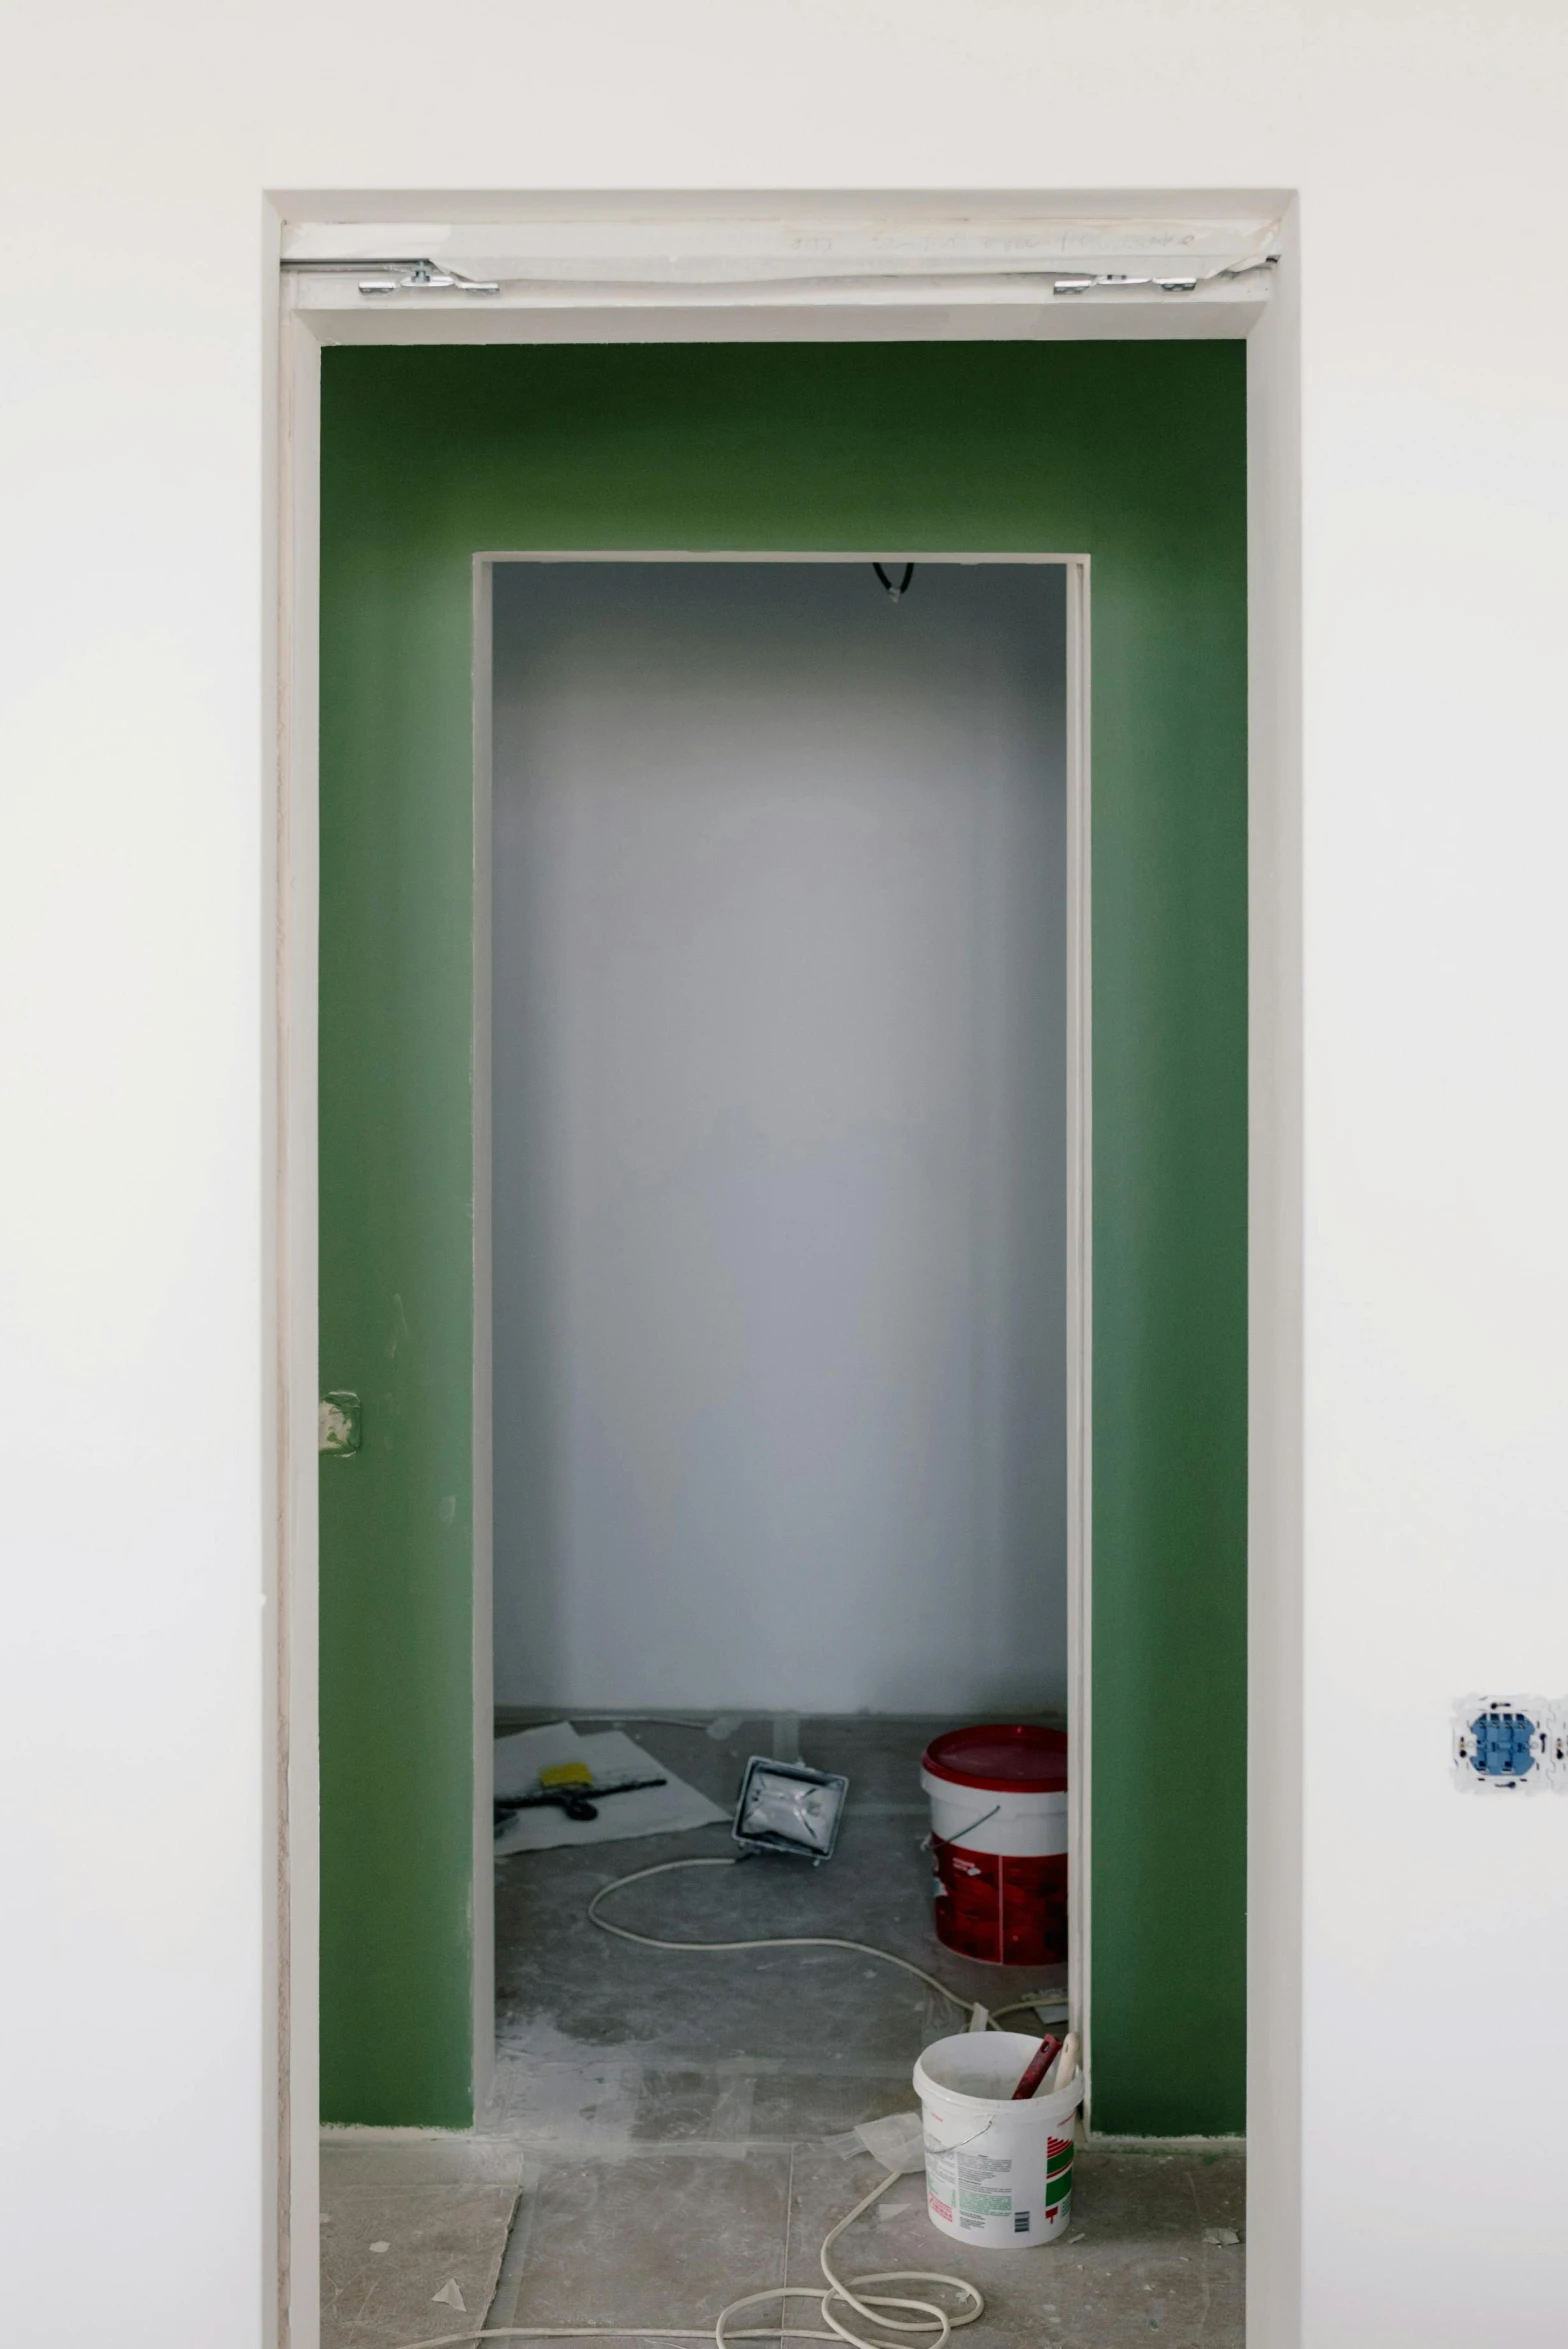 a room with green walls and a white door, by Ben Zoeller, conceptual art, under construction, hegre, colored, ap news photograph